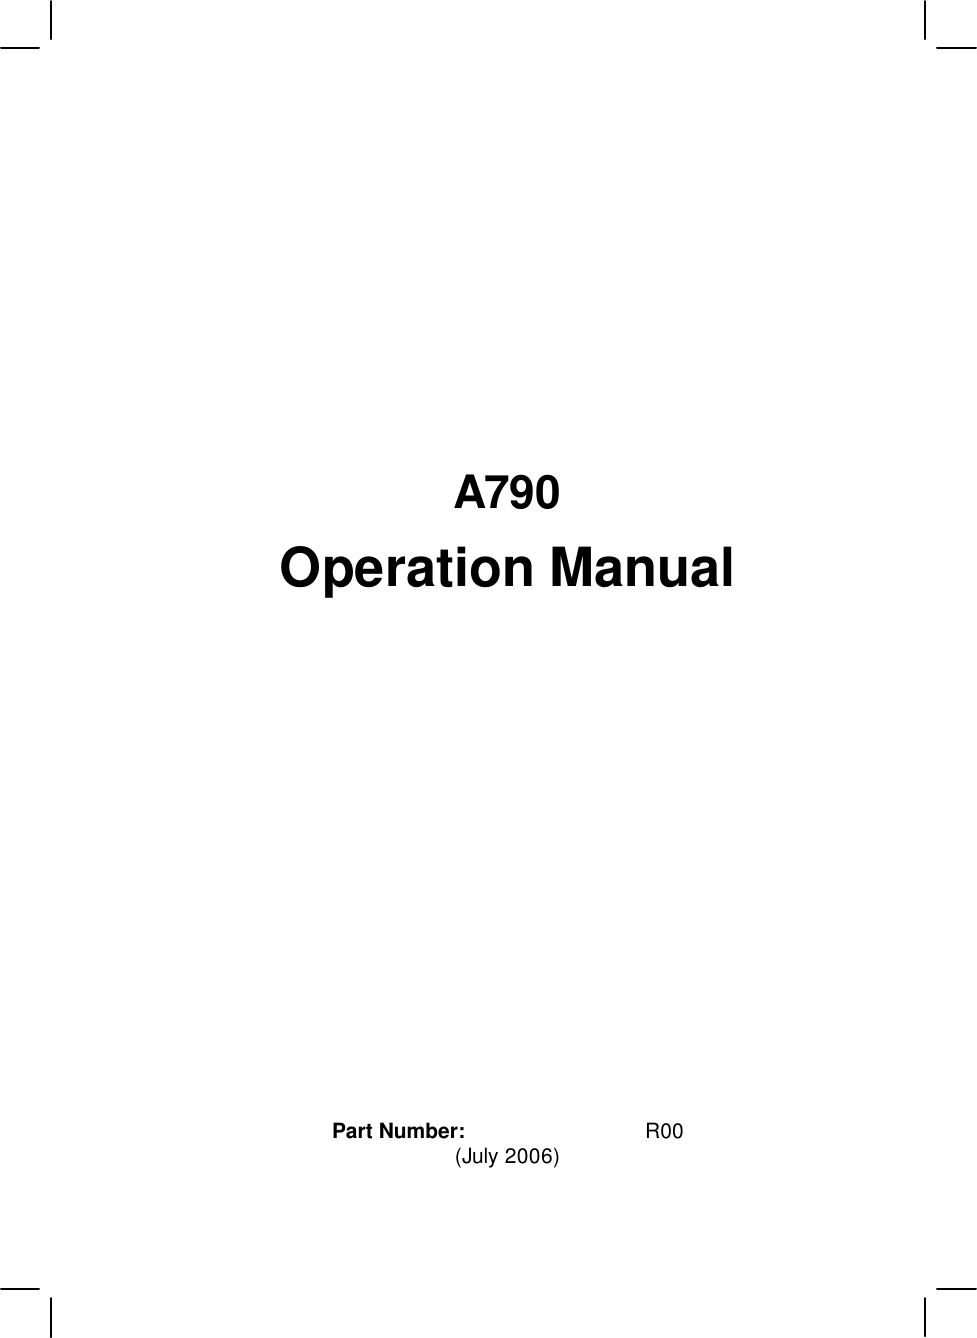           A790 Operation Manual             Part Number:  7990 0114 3001  R00 (July 2006)  